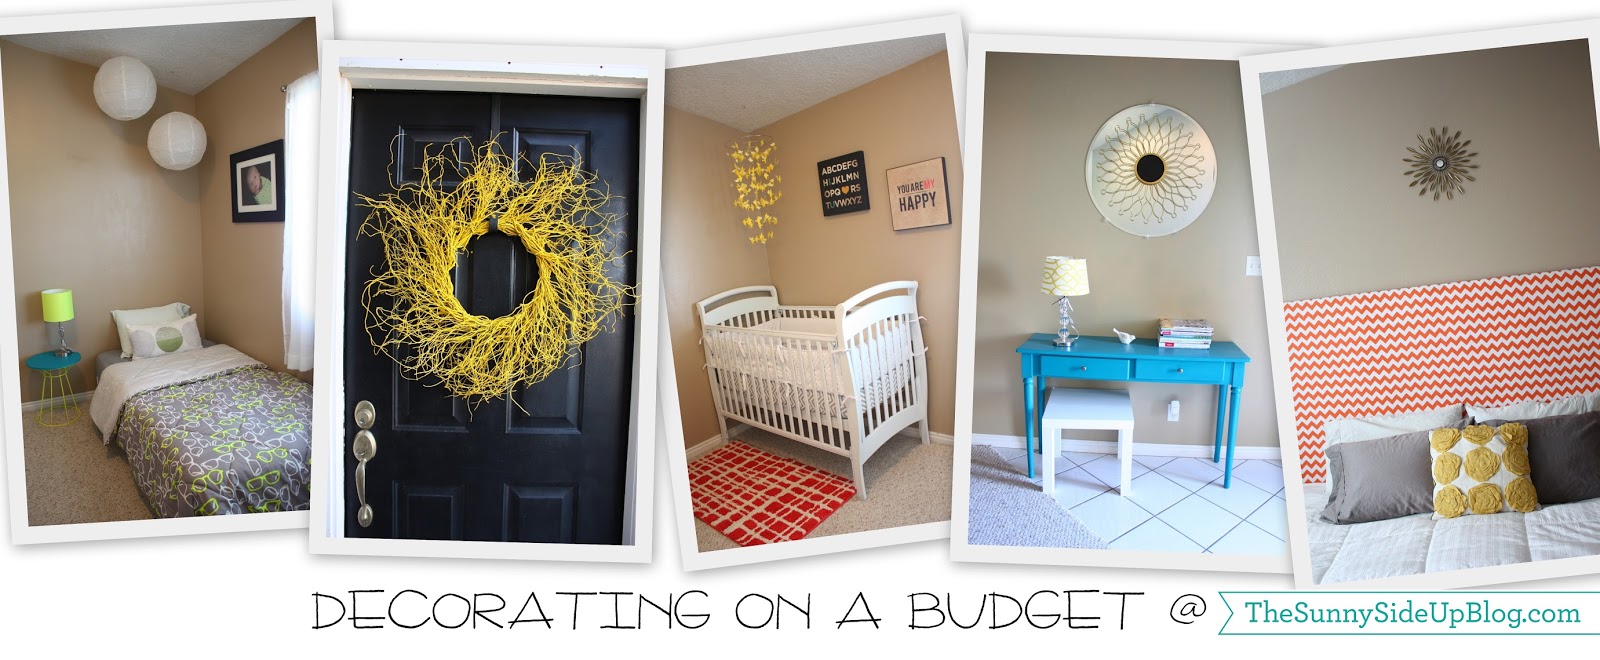  Decorating  on a budget  fun ideas The Sunny Side Up Blog